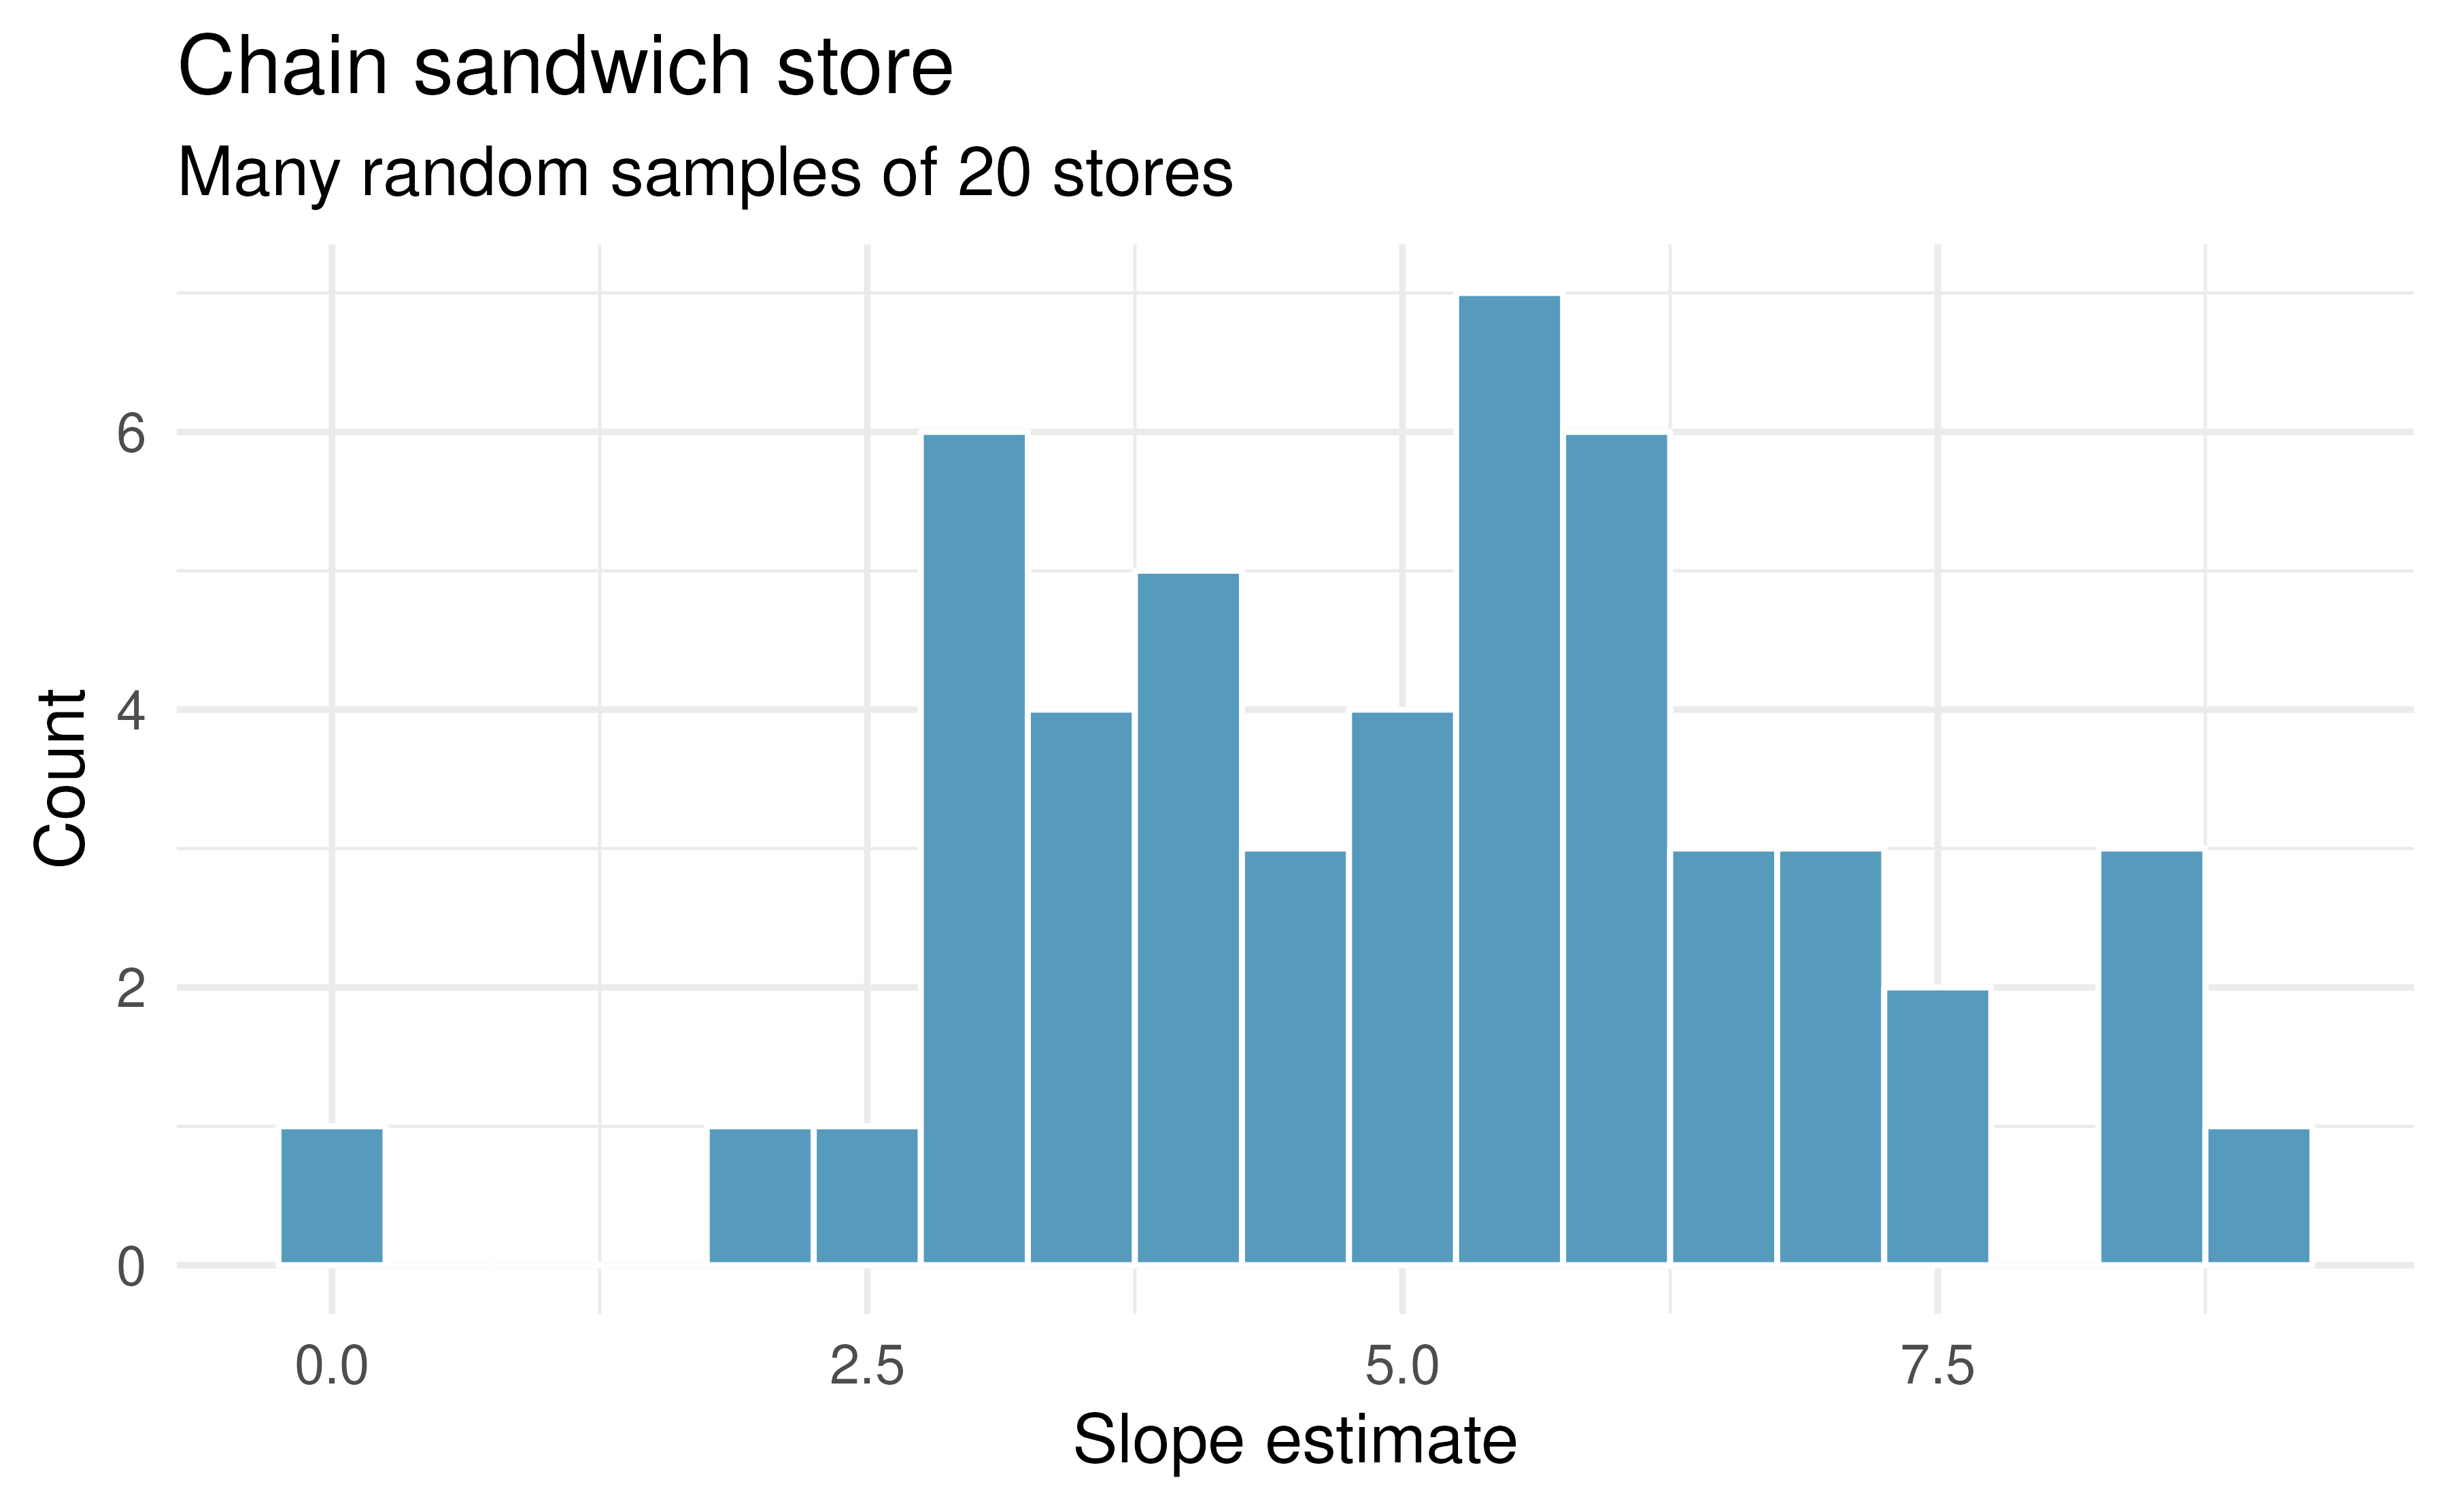 Variability of slope estimates taken from many different samples of stores, each of size 20.